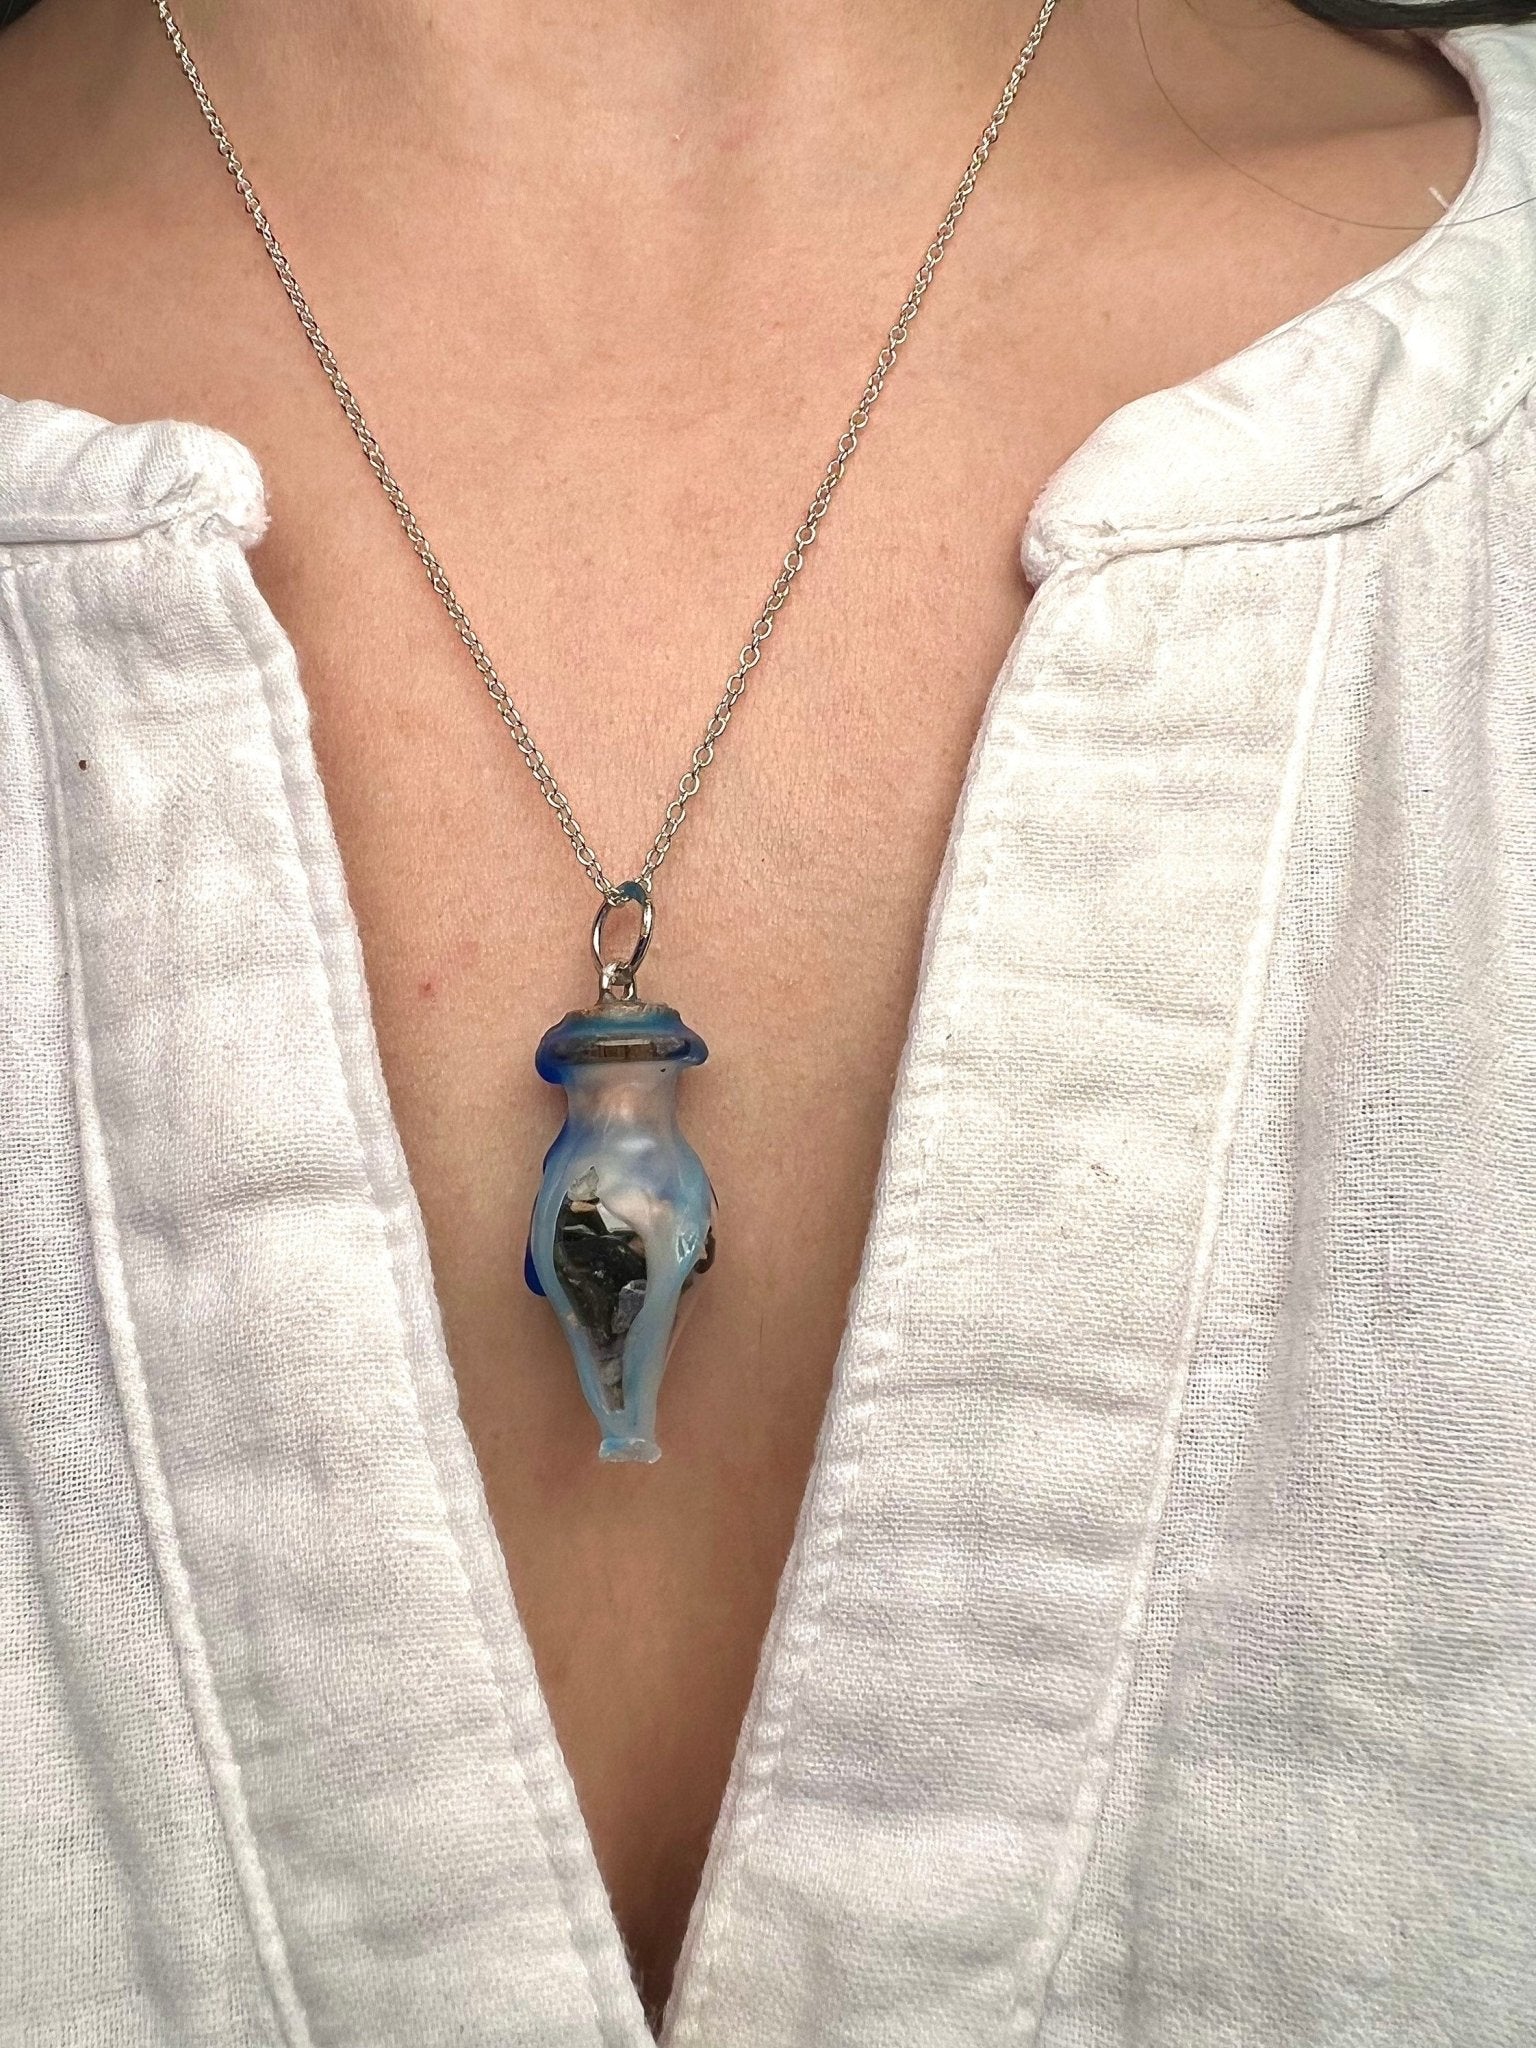 Healing Spell Jar Necklace - Hoodoo Jar Bottle Jewelry - Spiritual Healing - Emotional Wounds - Relationship Blessed Sterling Silver Chain - MysticBluuMoonTarot